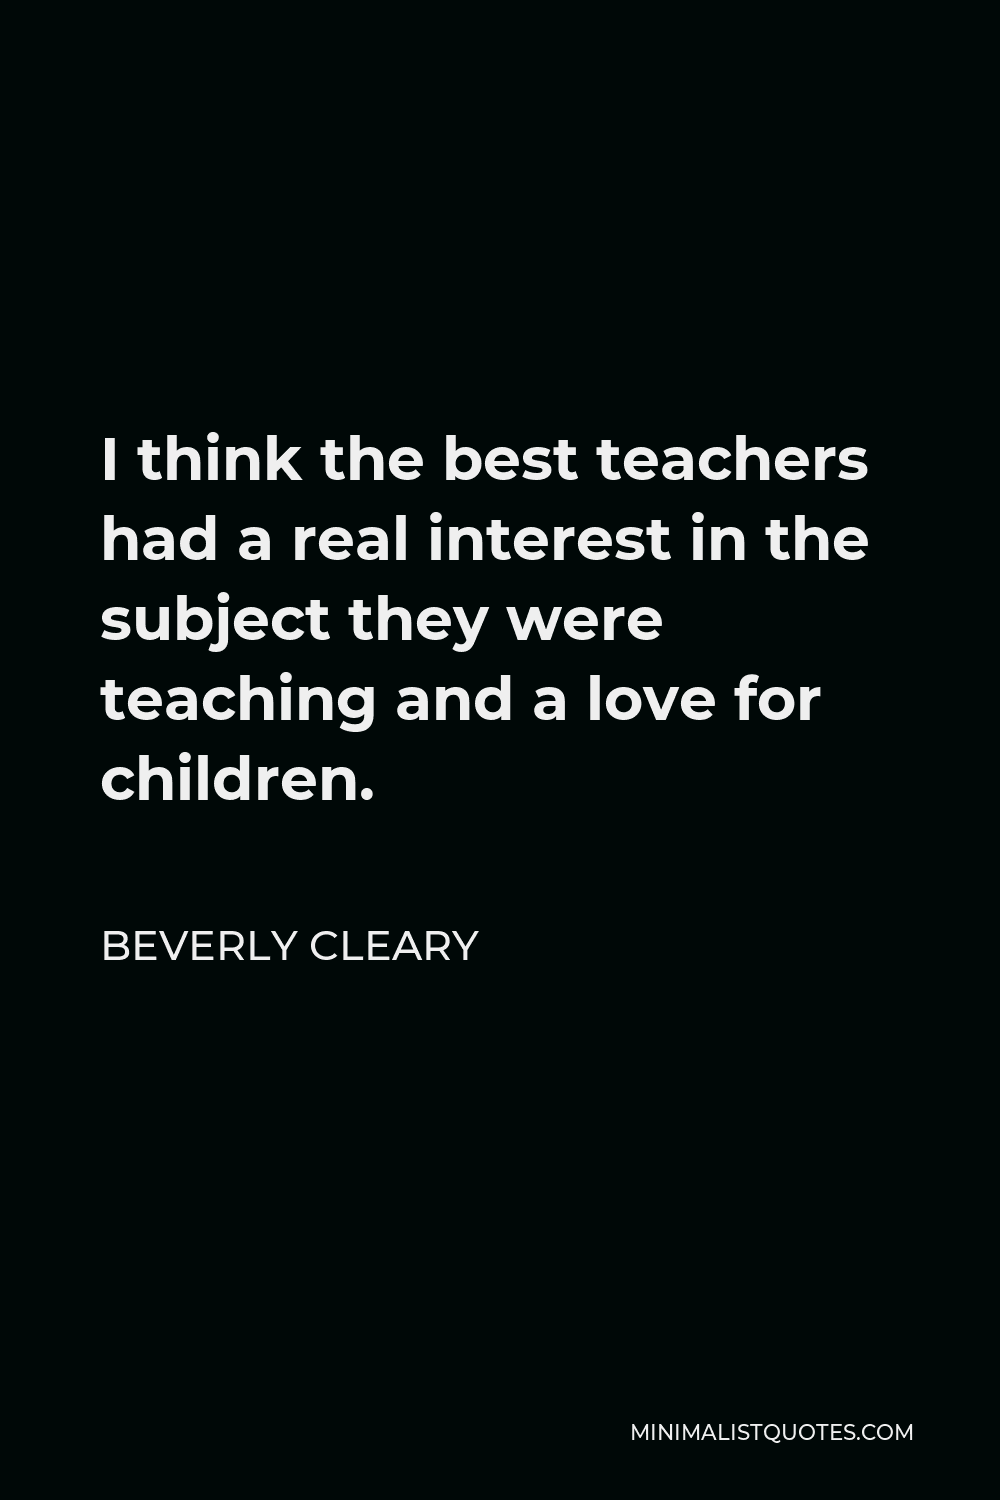 Beverly Cleary Quote - I think the best teachers had a real interest in the subject they were teaching and a love for children.